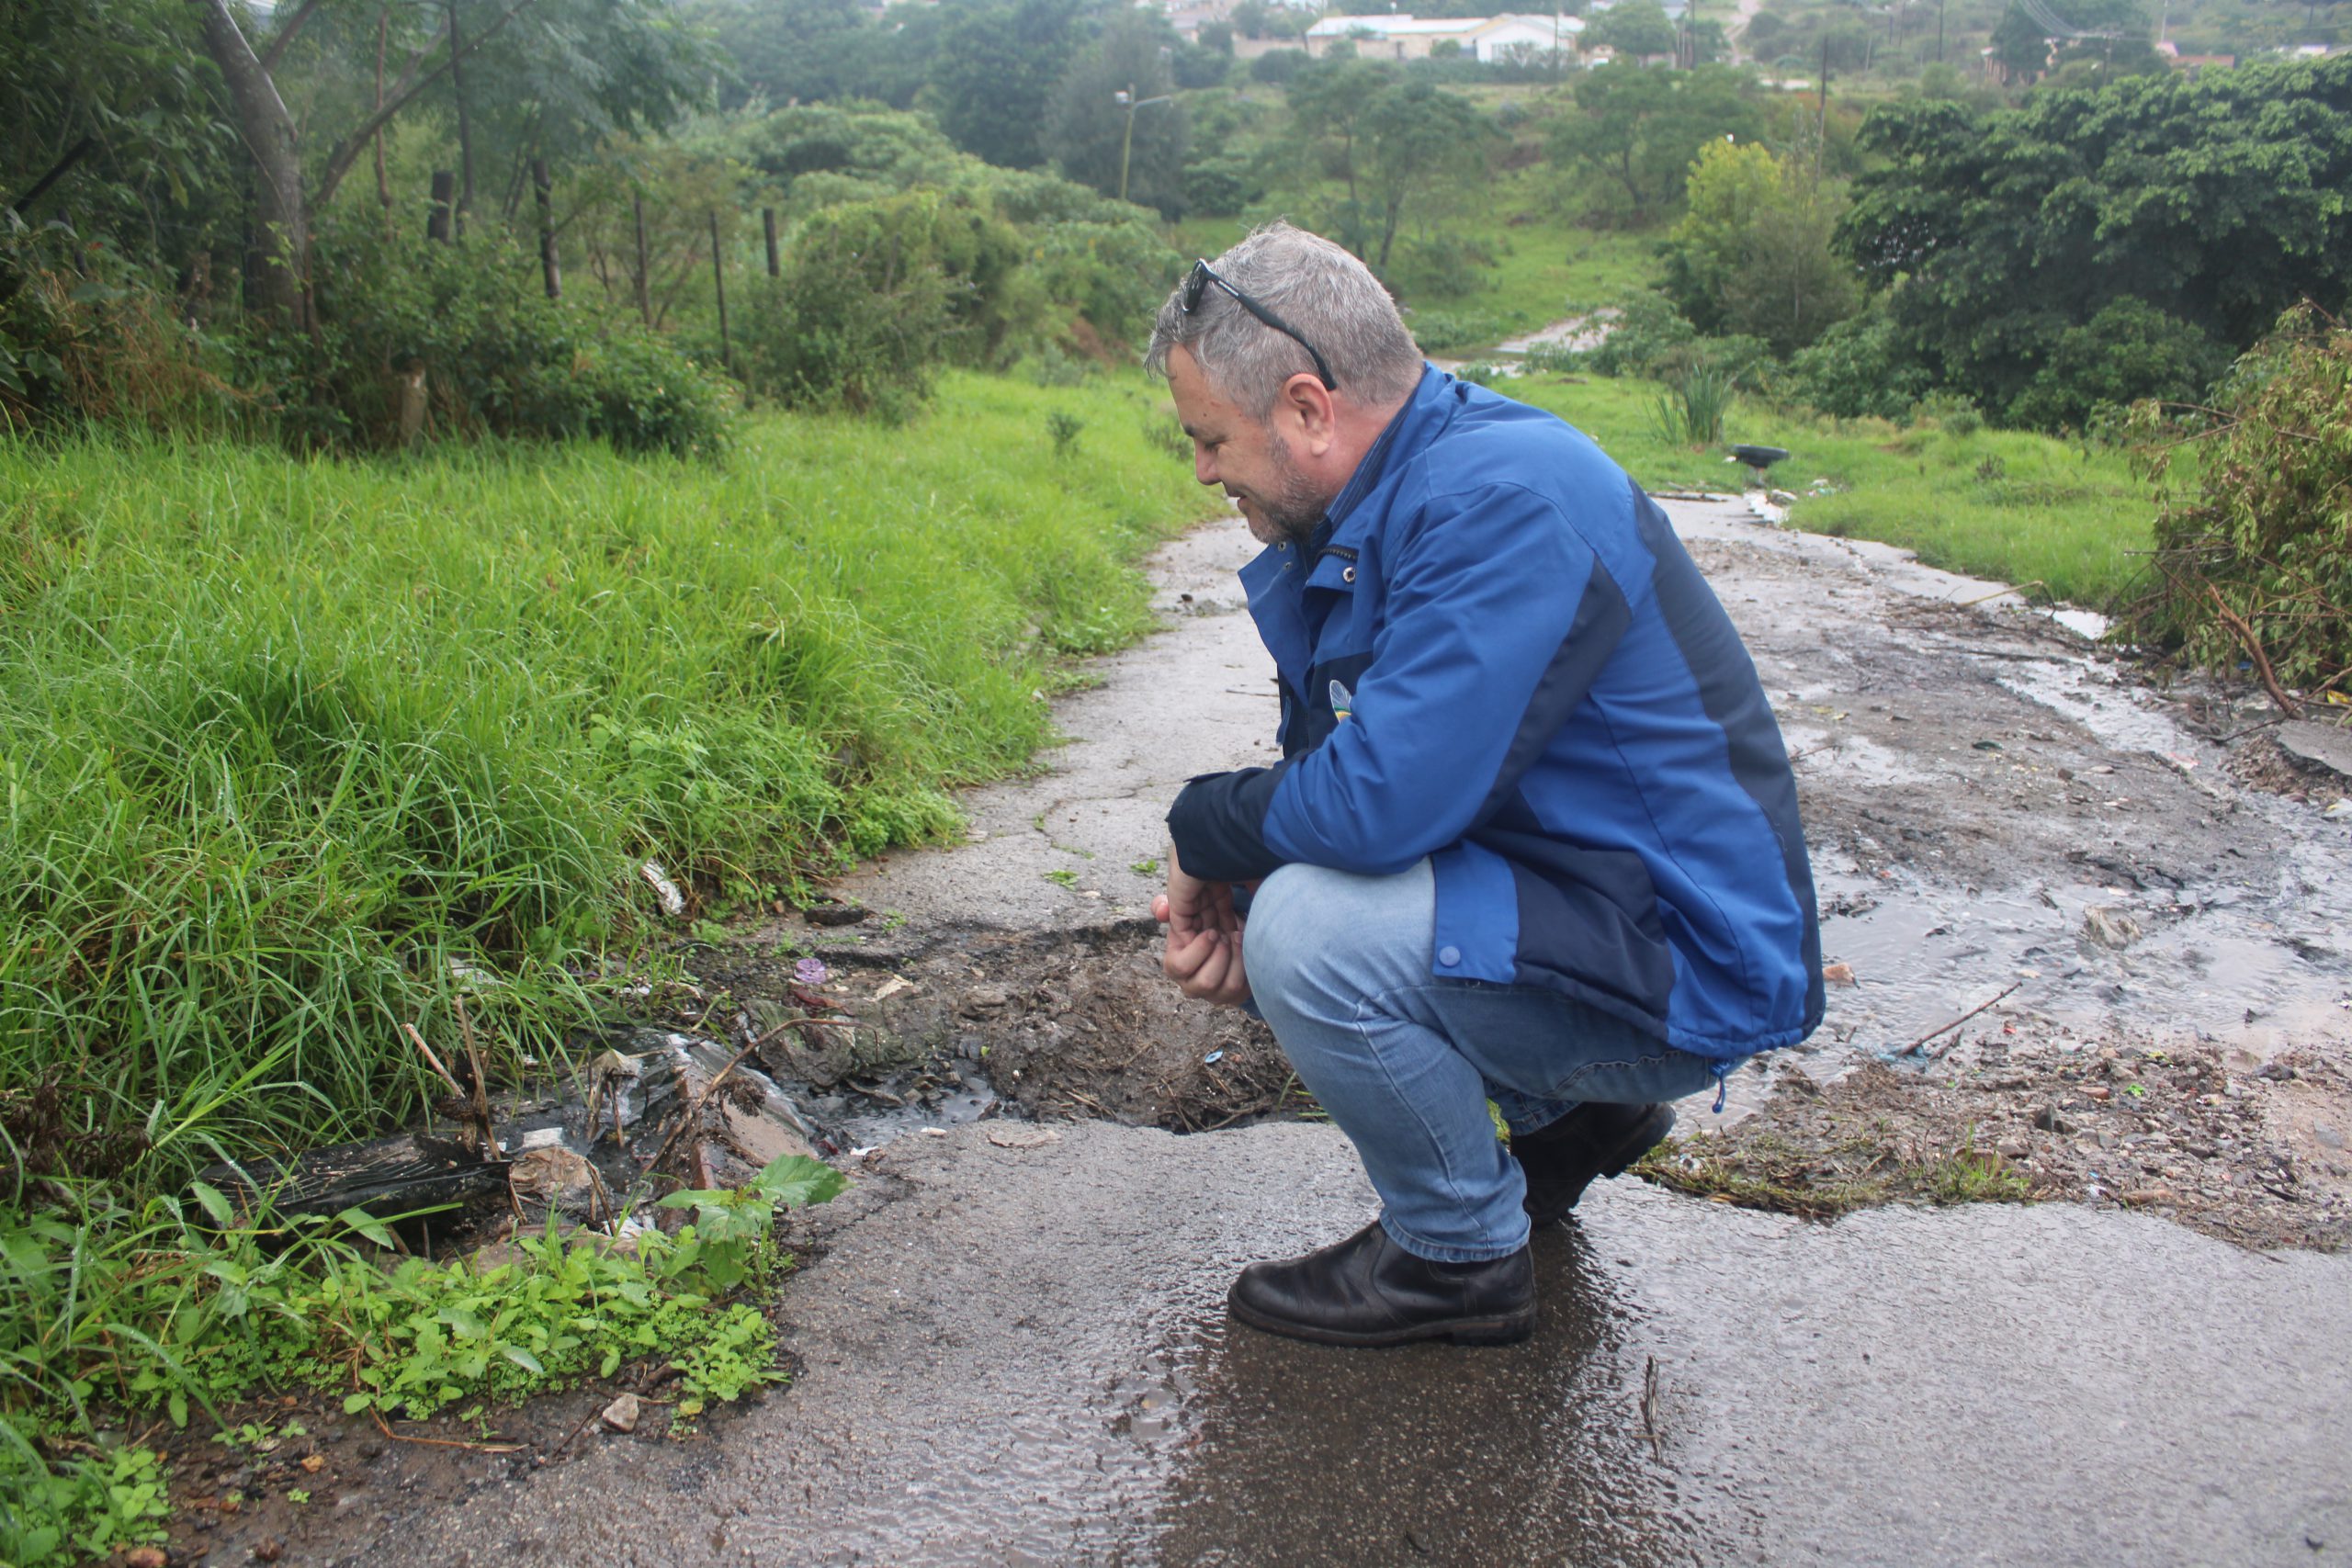 A member of DA inspecting a destroyed road with sewage.